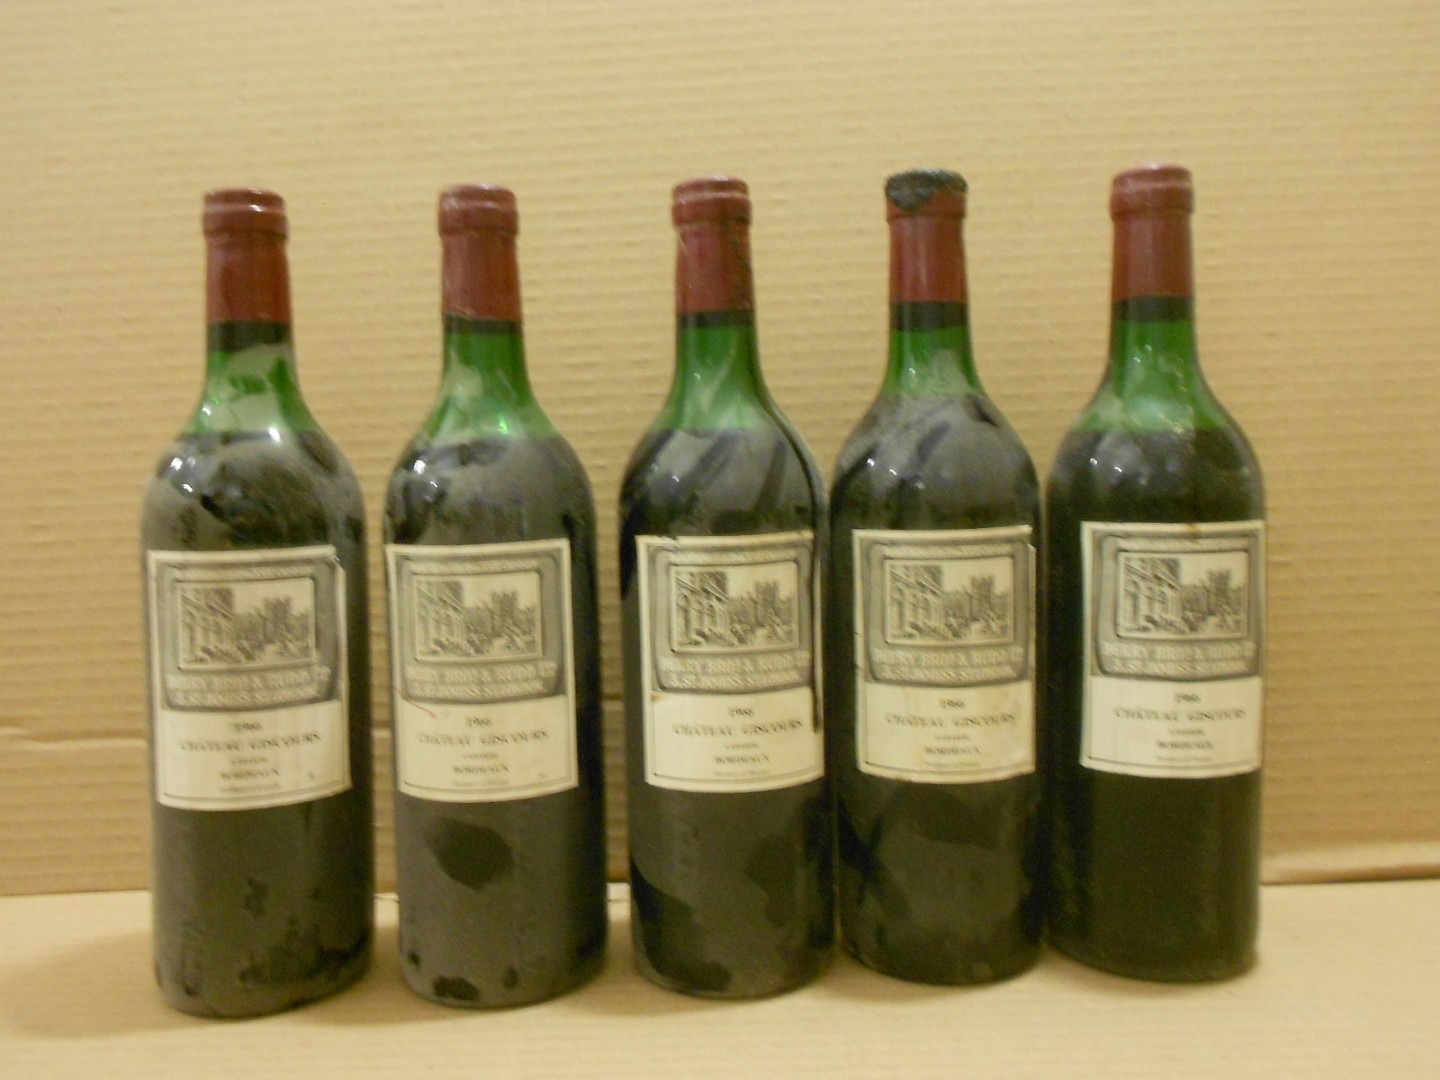 Chateau Giscours, Margaux 3eme Cru 1966, eleven bottles, Berry Brothers labels, levels vary. Removed - Image 2 of 2